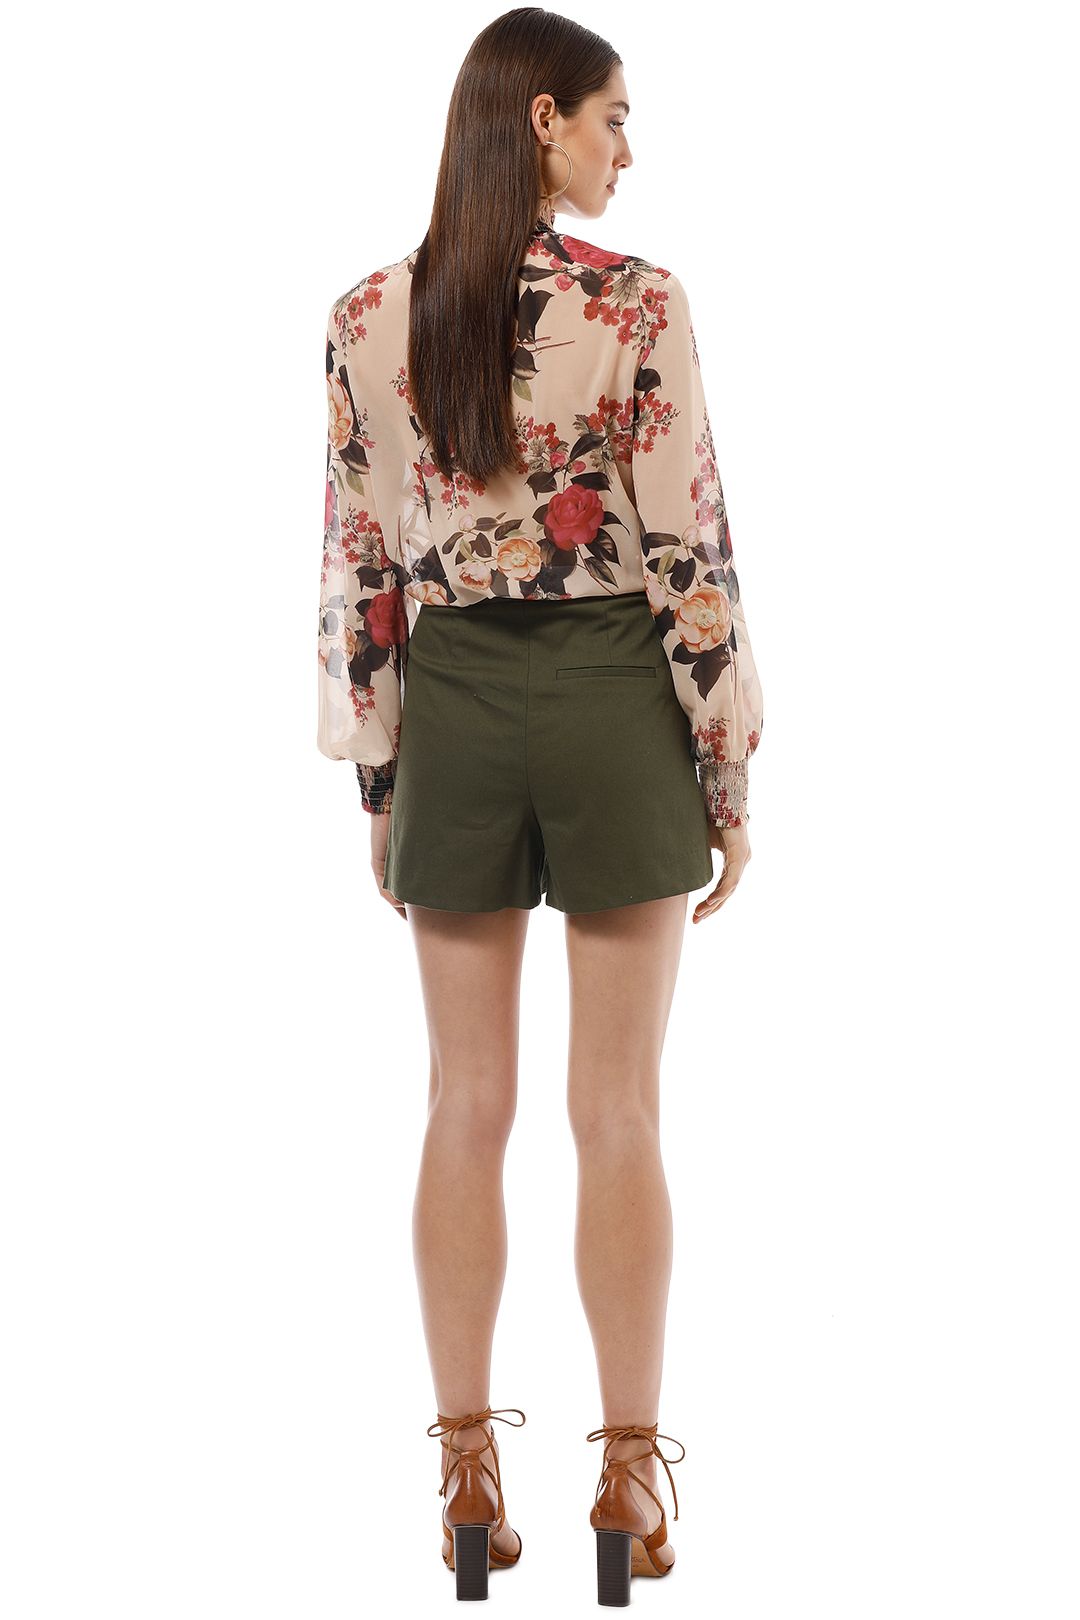 Sheike - Billy Blouse - Cream Floral - Back